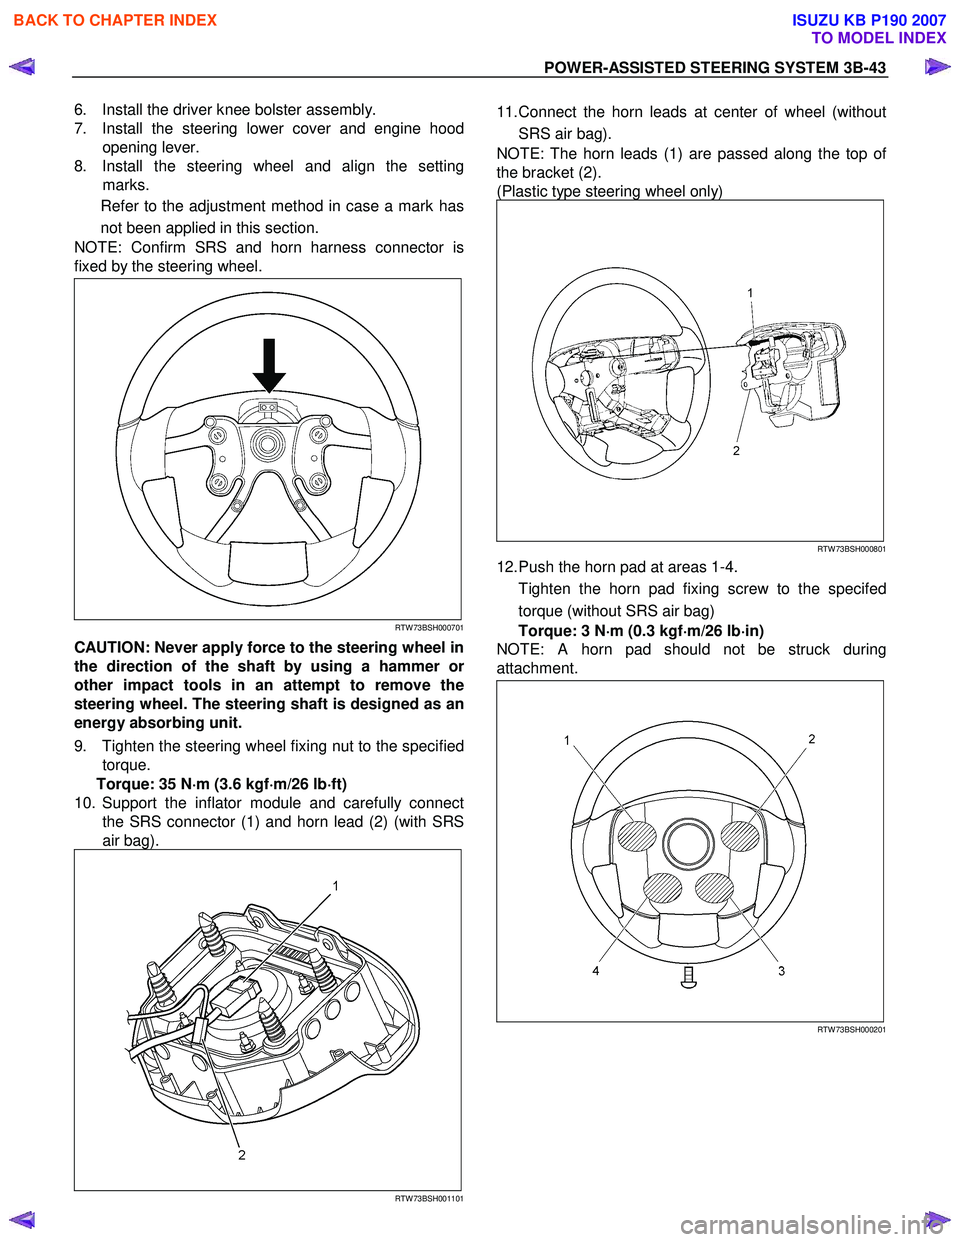 ISUZU KB P190 2007  Workshop Service Manual POWER-ASSISTED STEERING SYSTEM 3B-43 
6.  Install the driver knee bolster assembly.  
7.  Install the steering lower cover and engine hood opening lever. 
8.  Install the steering wheel and align the 